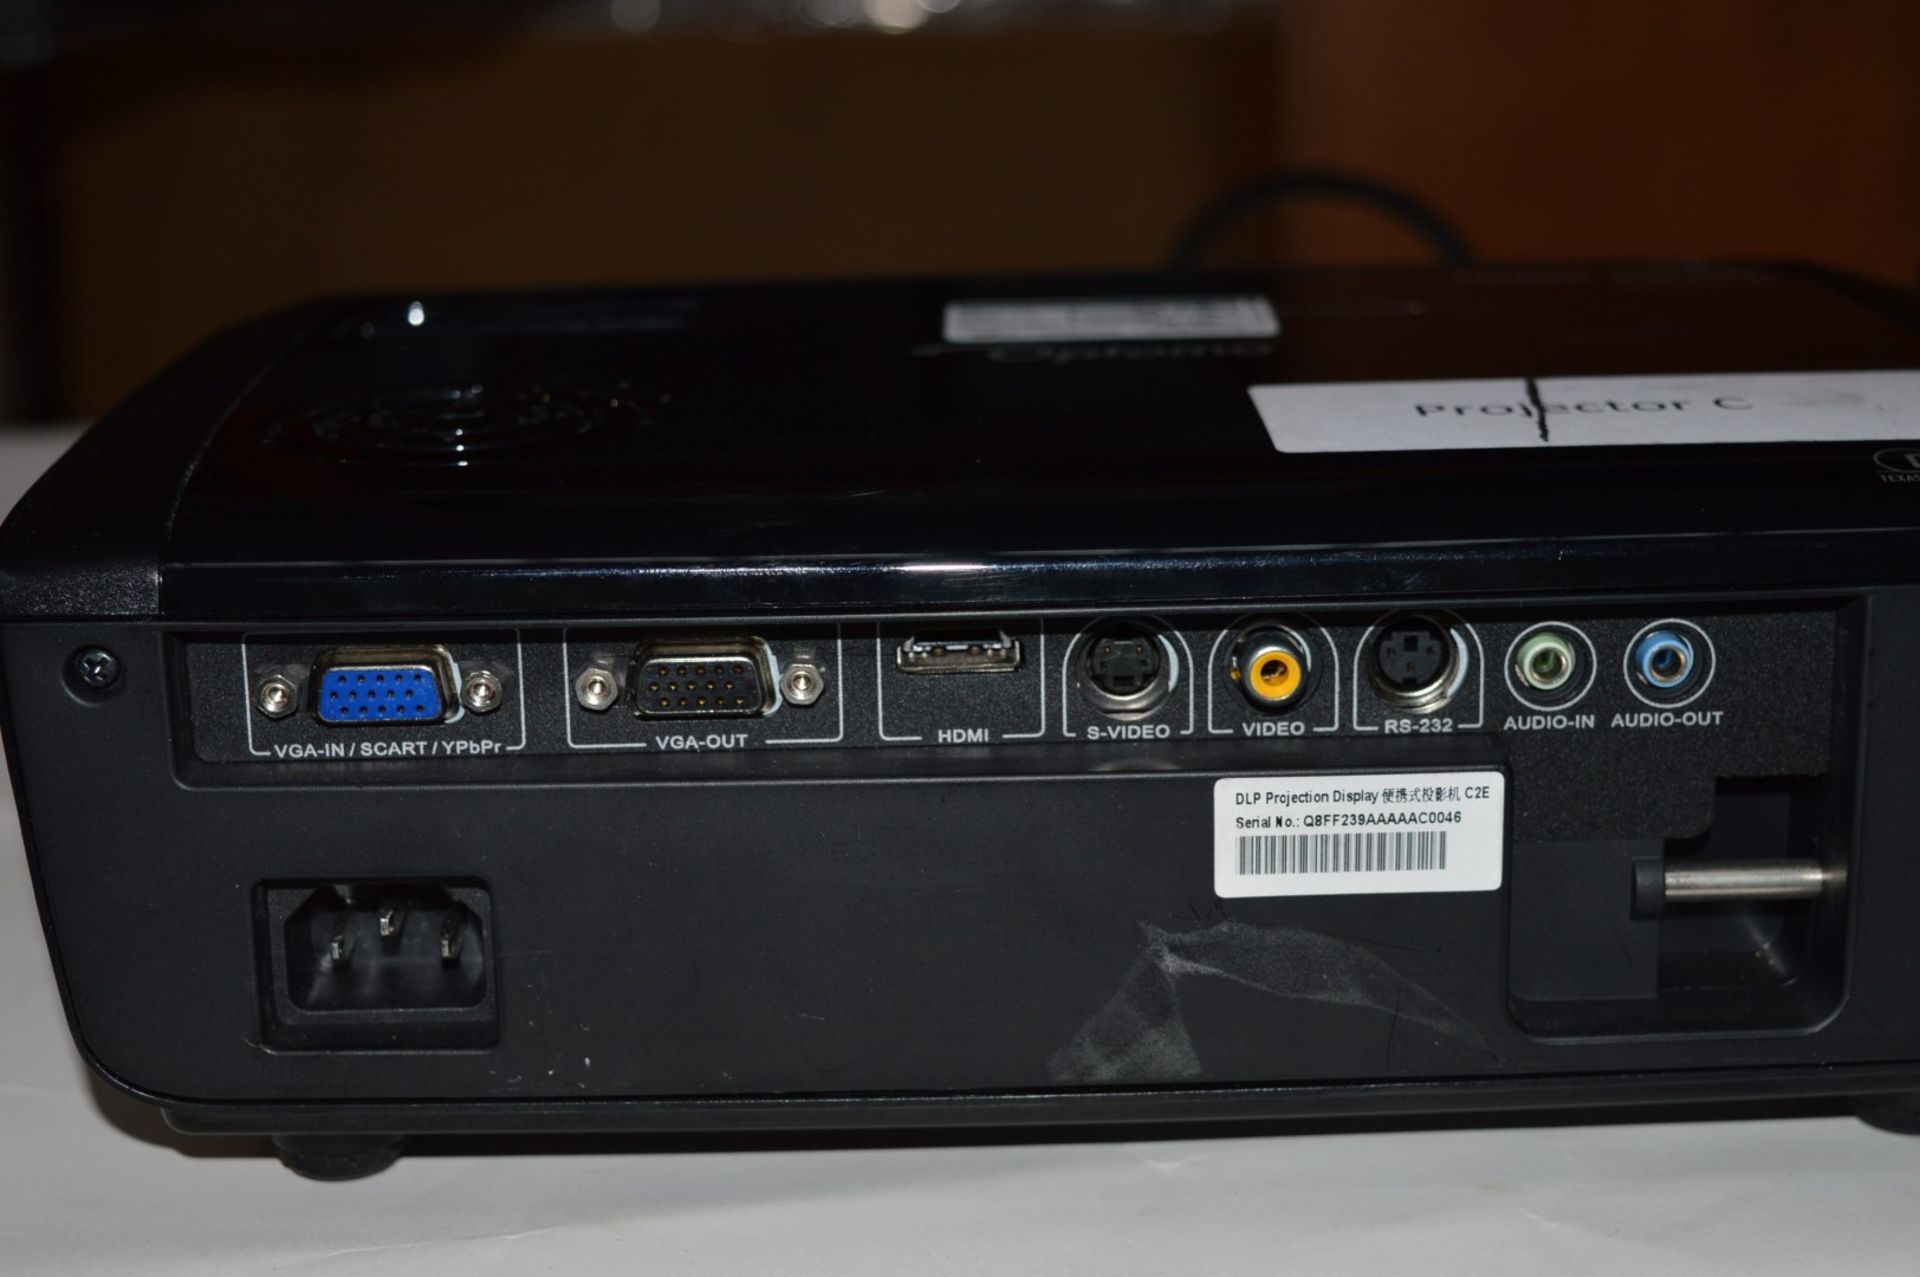 1 x Optoma DLP Projector With HDMI 16:10 Enhanced Widescreen - Very Good Condition - Good Working - Image 2 of 7